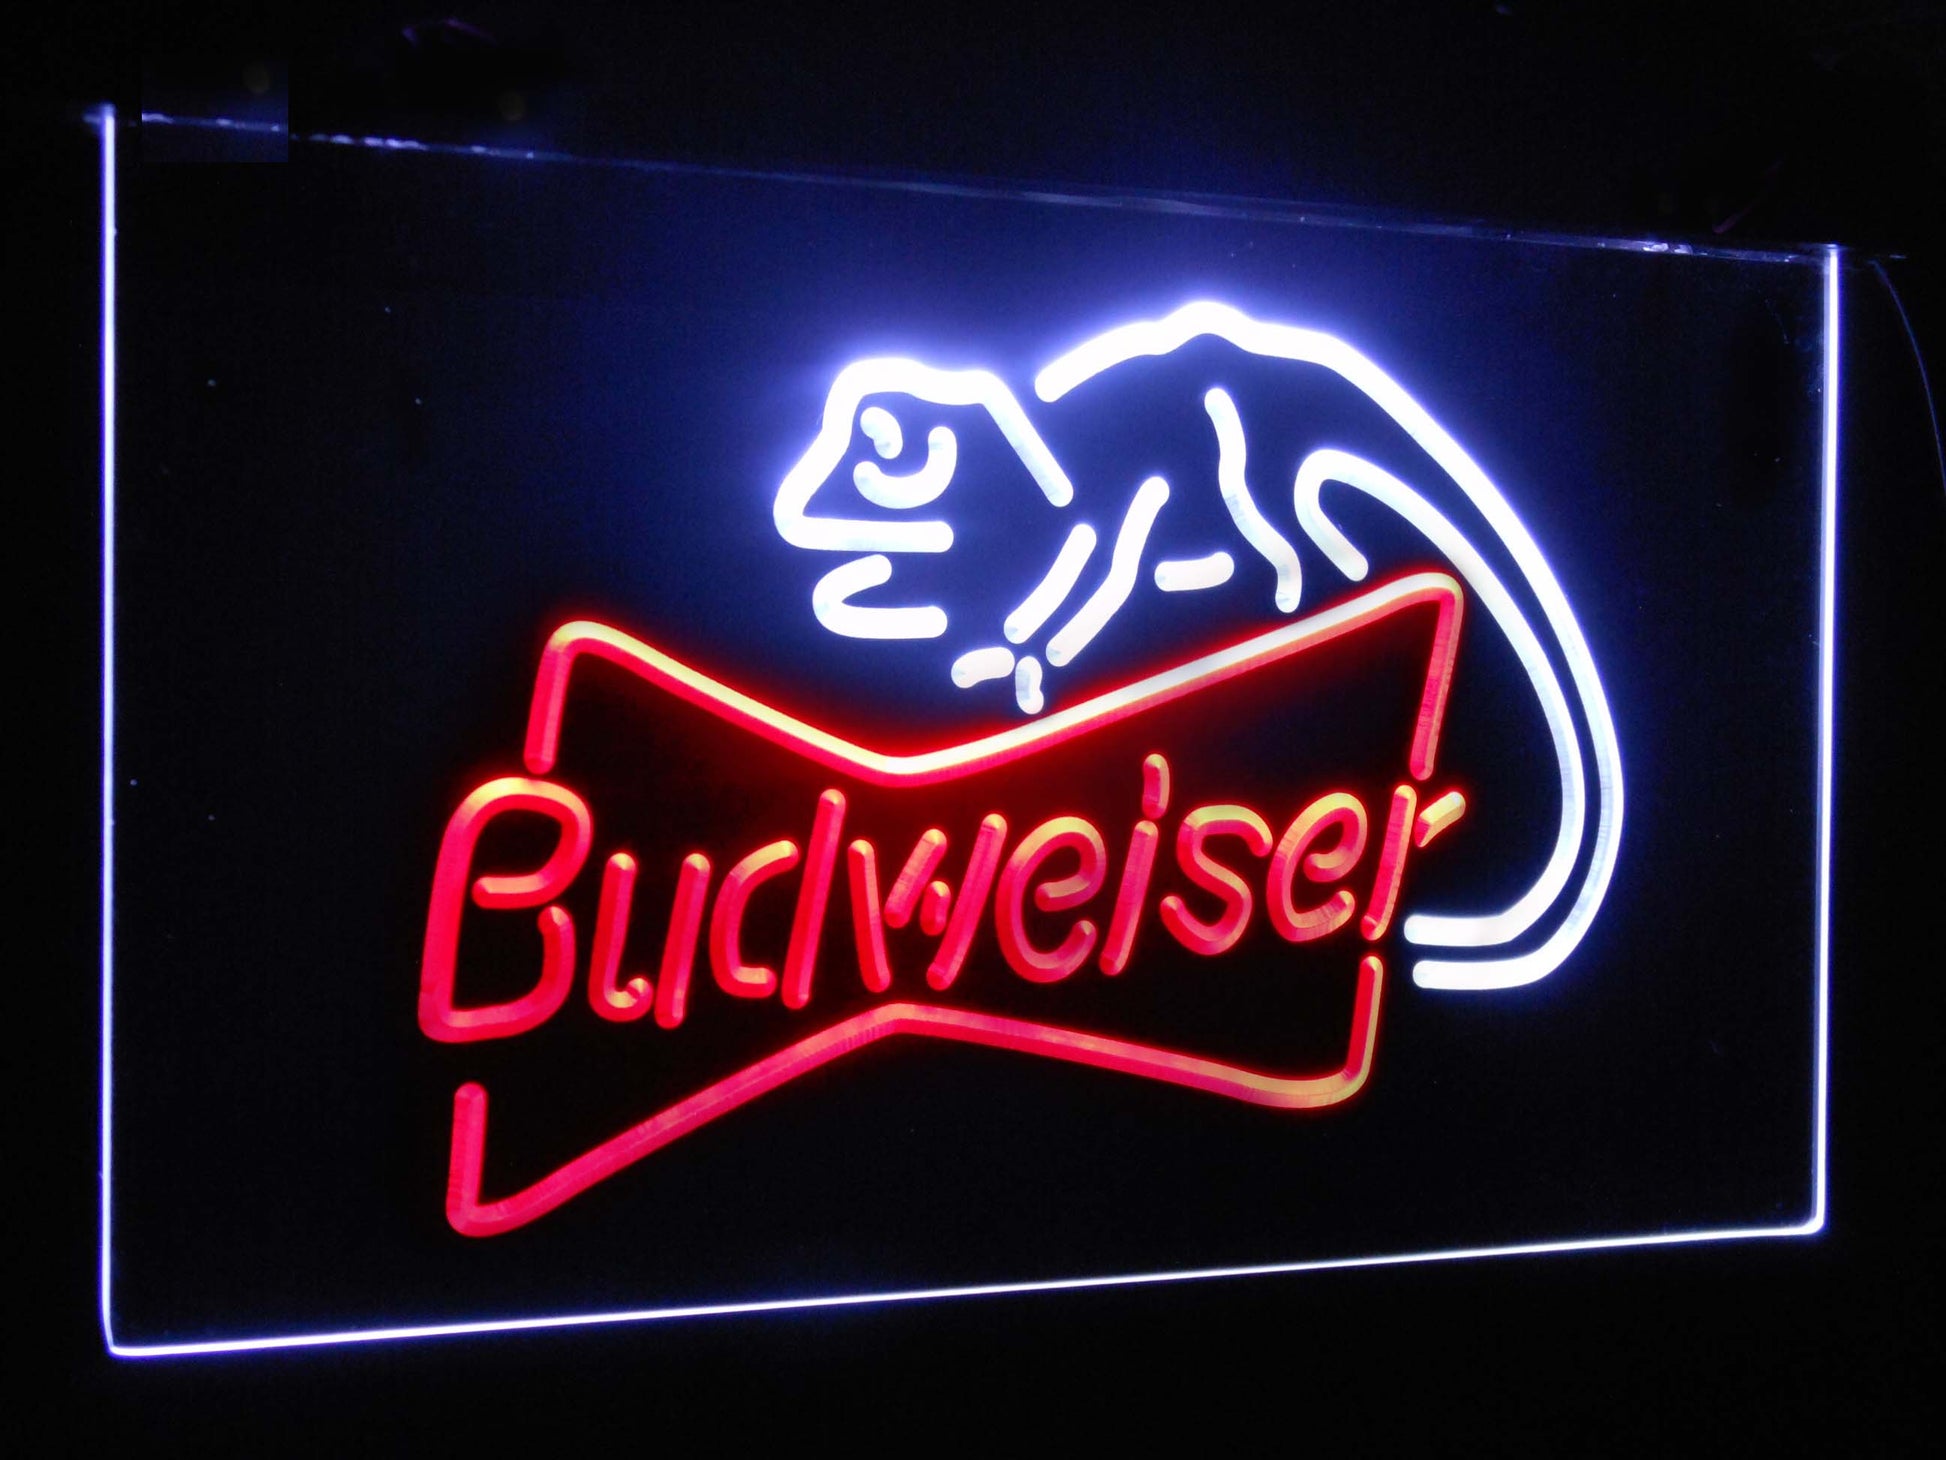 Budweiser Lizard  Bar Decoration Gift Dual Color Led Neon Light Signs st6-a2084 by Woody Signs Co. - Handmade Crafted Unique Wooden Creative